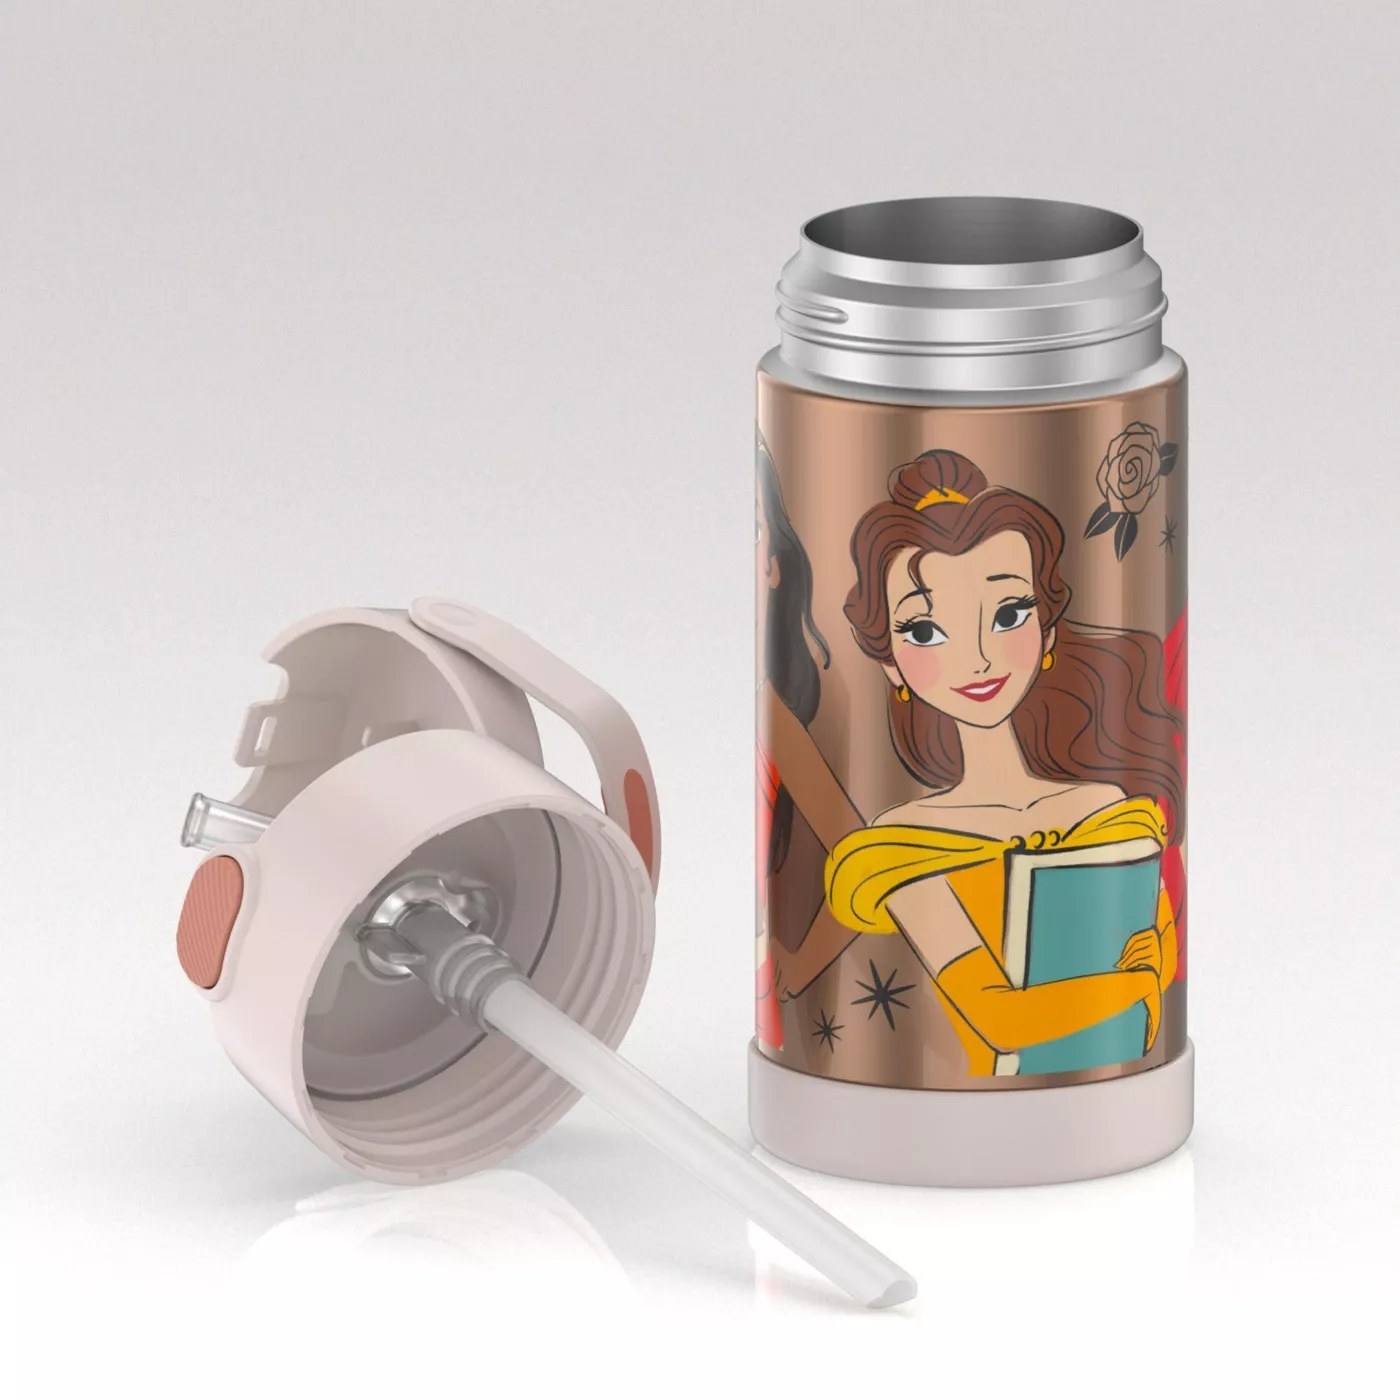 The Thermos with Belle on the front